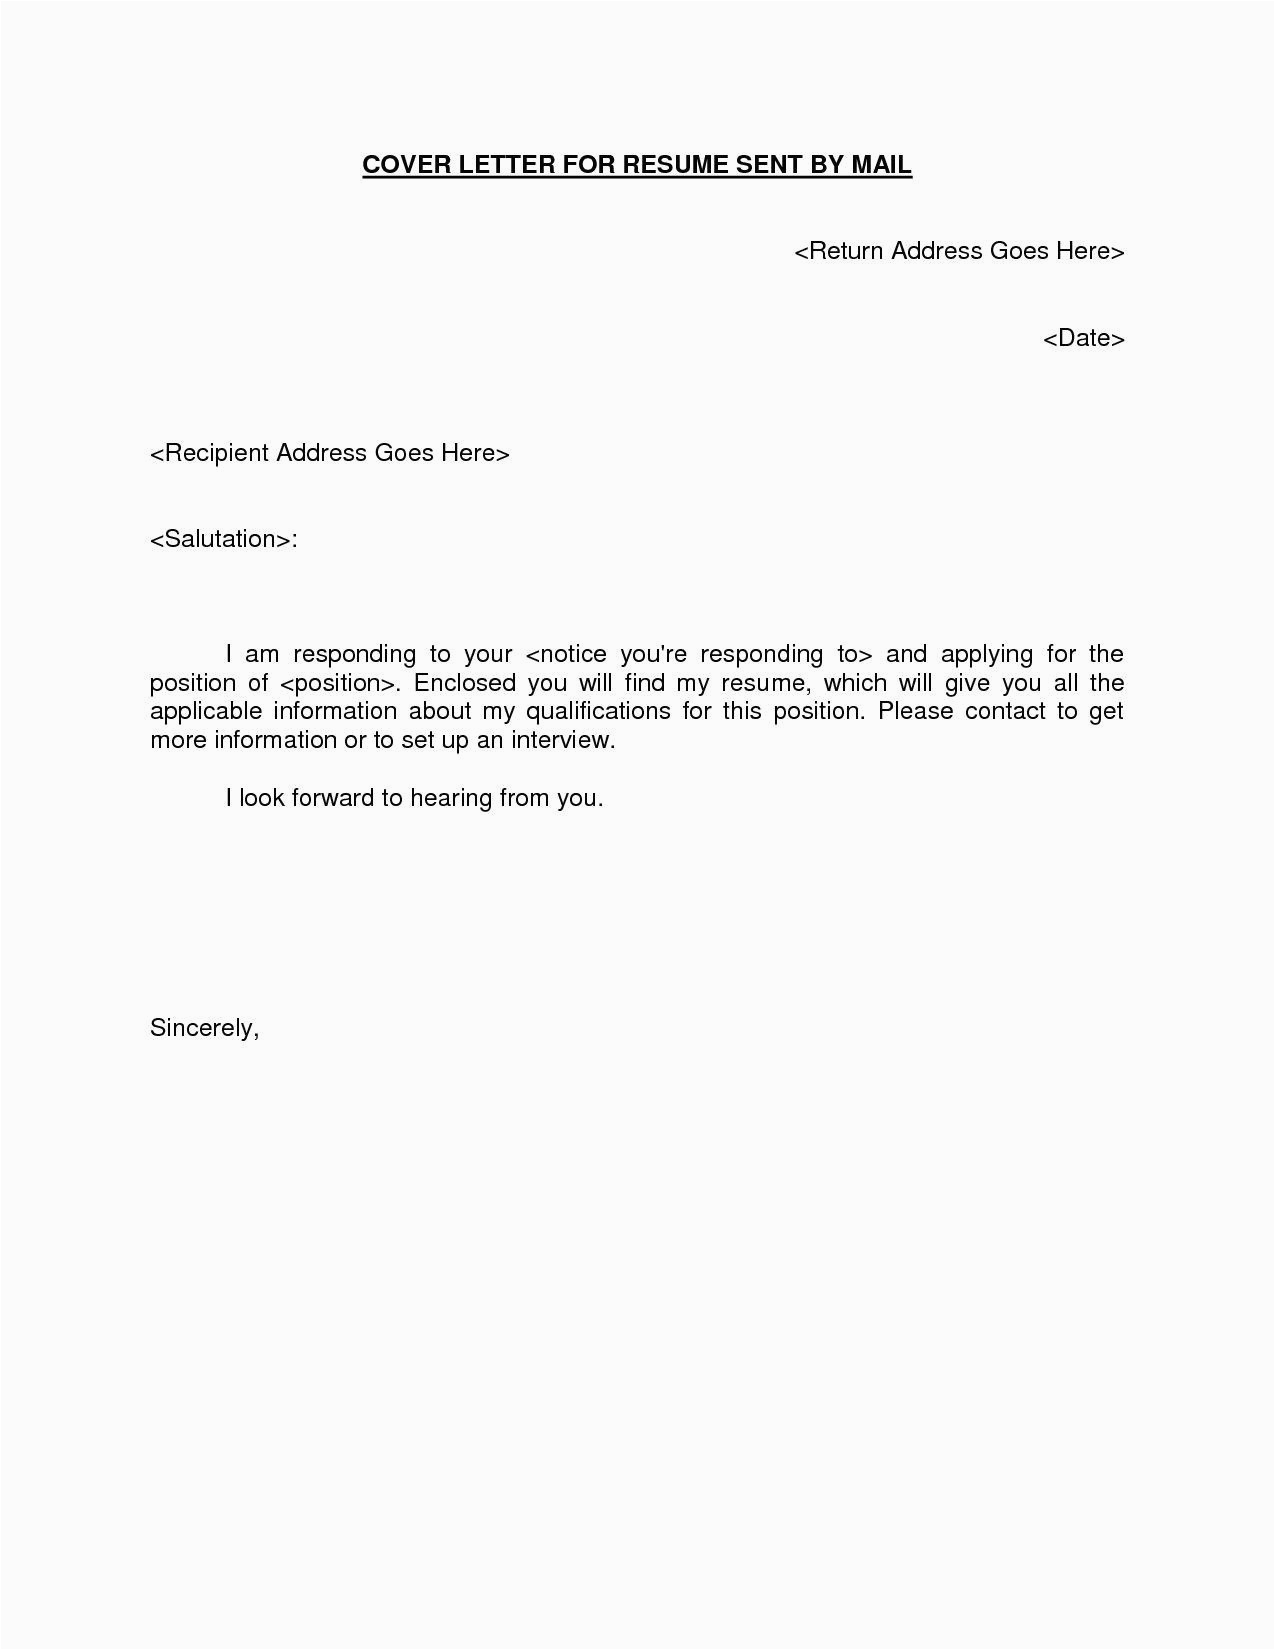 Sample Covering Letter for Sending Resume Through Email Unique Fax Cover Letters with Images